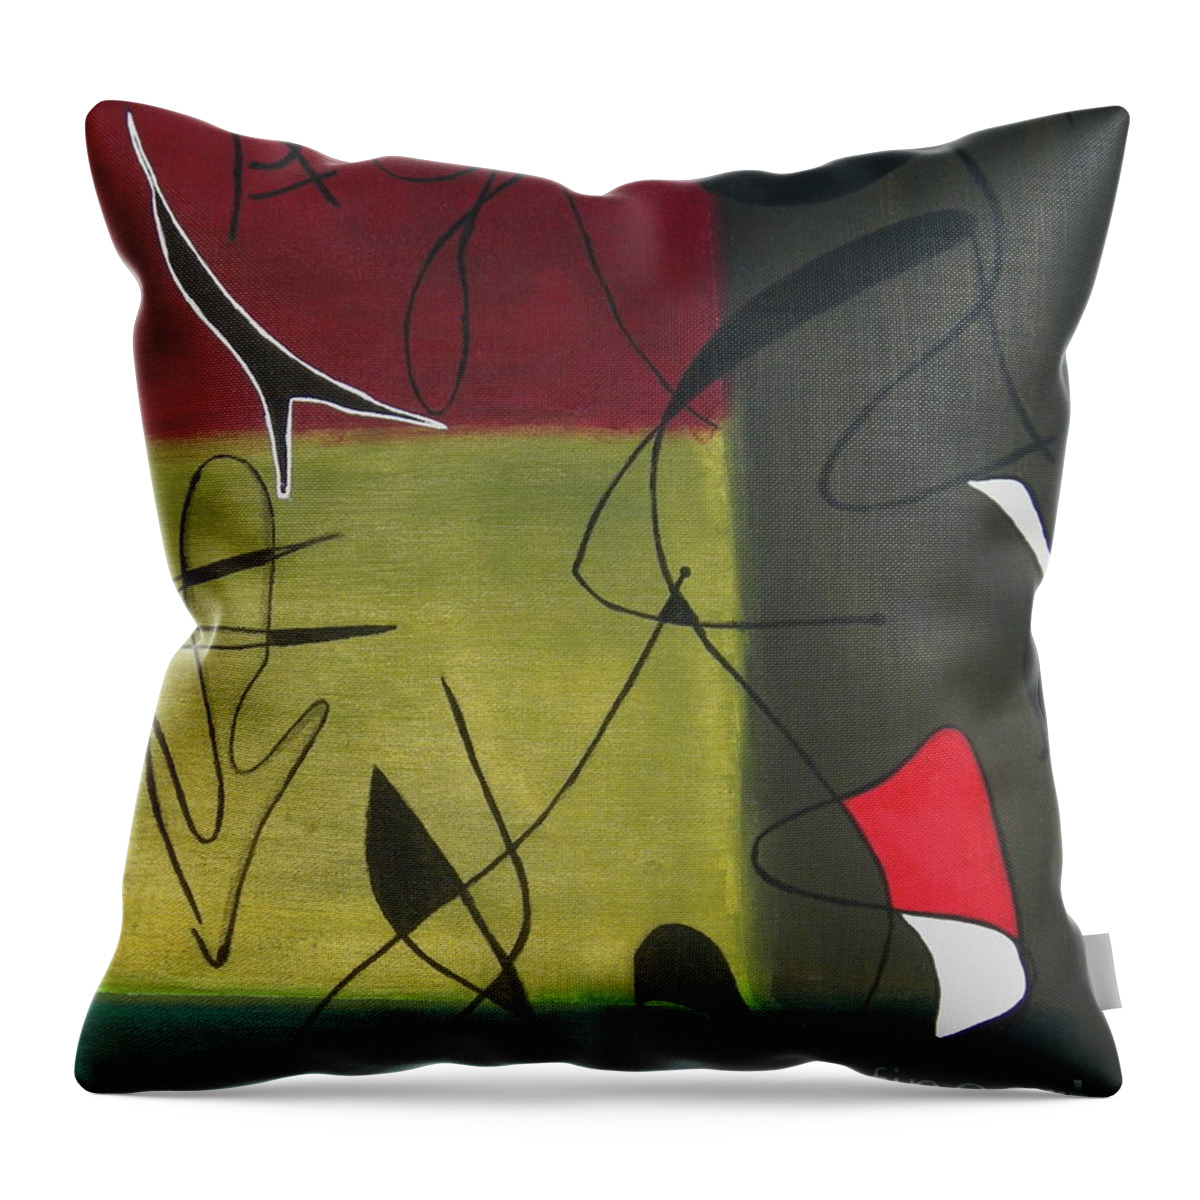 Abstract Painting Throw Pillow featuring the painting Medium by Jeff Barrett